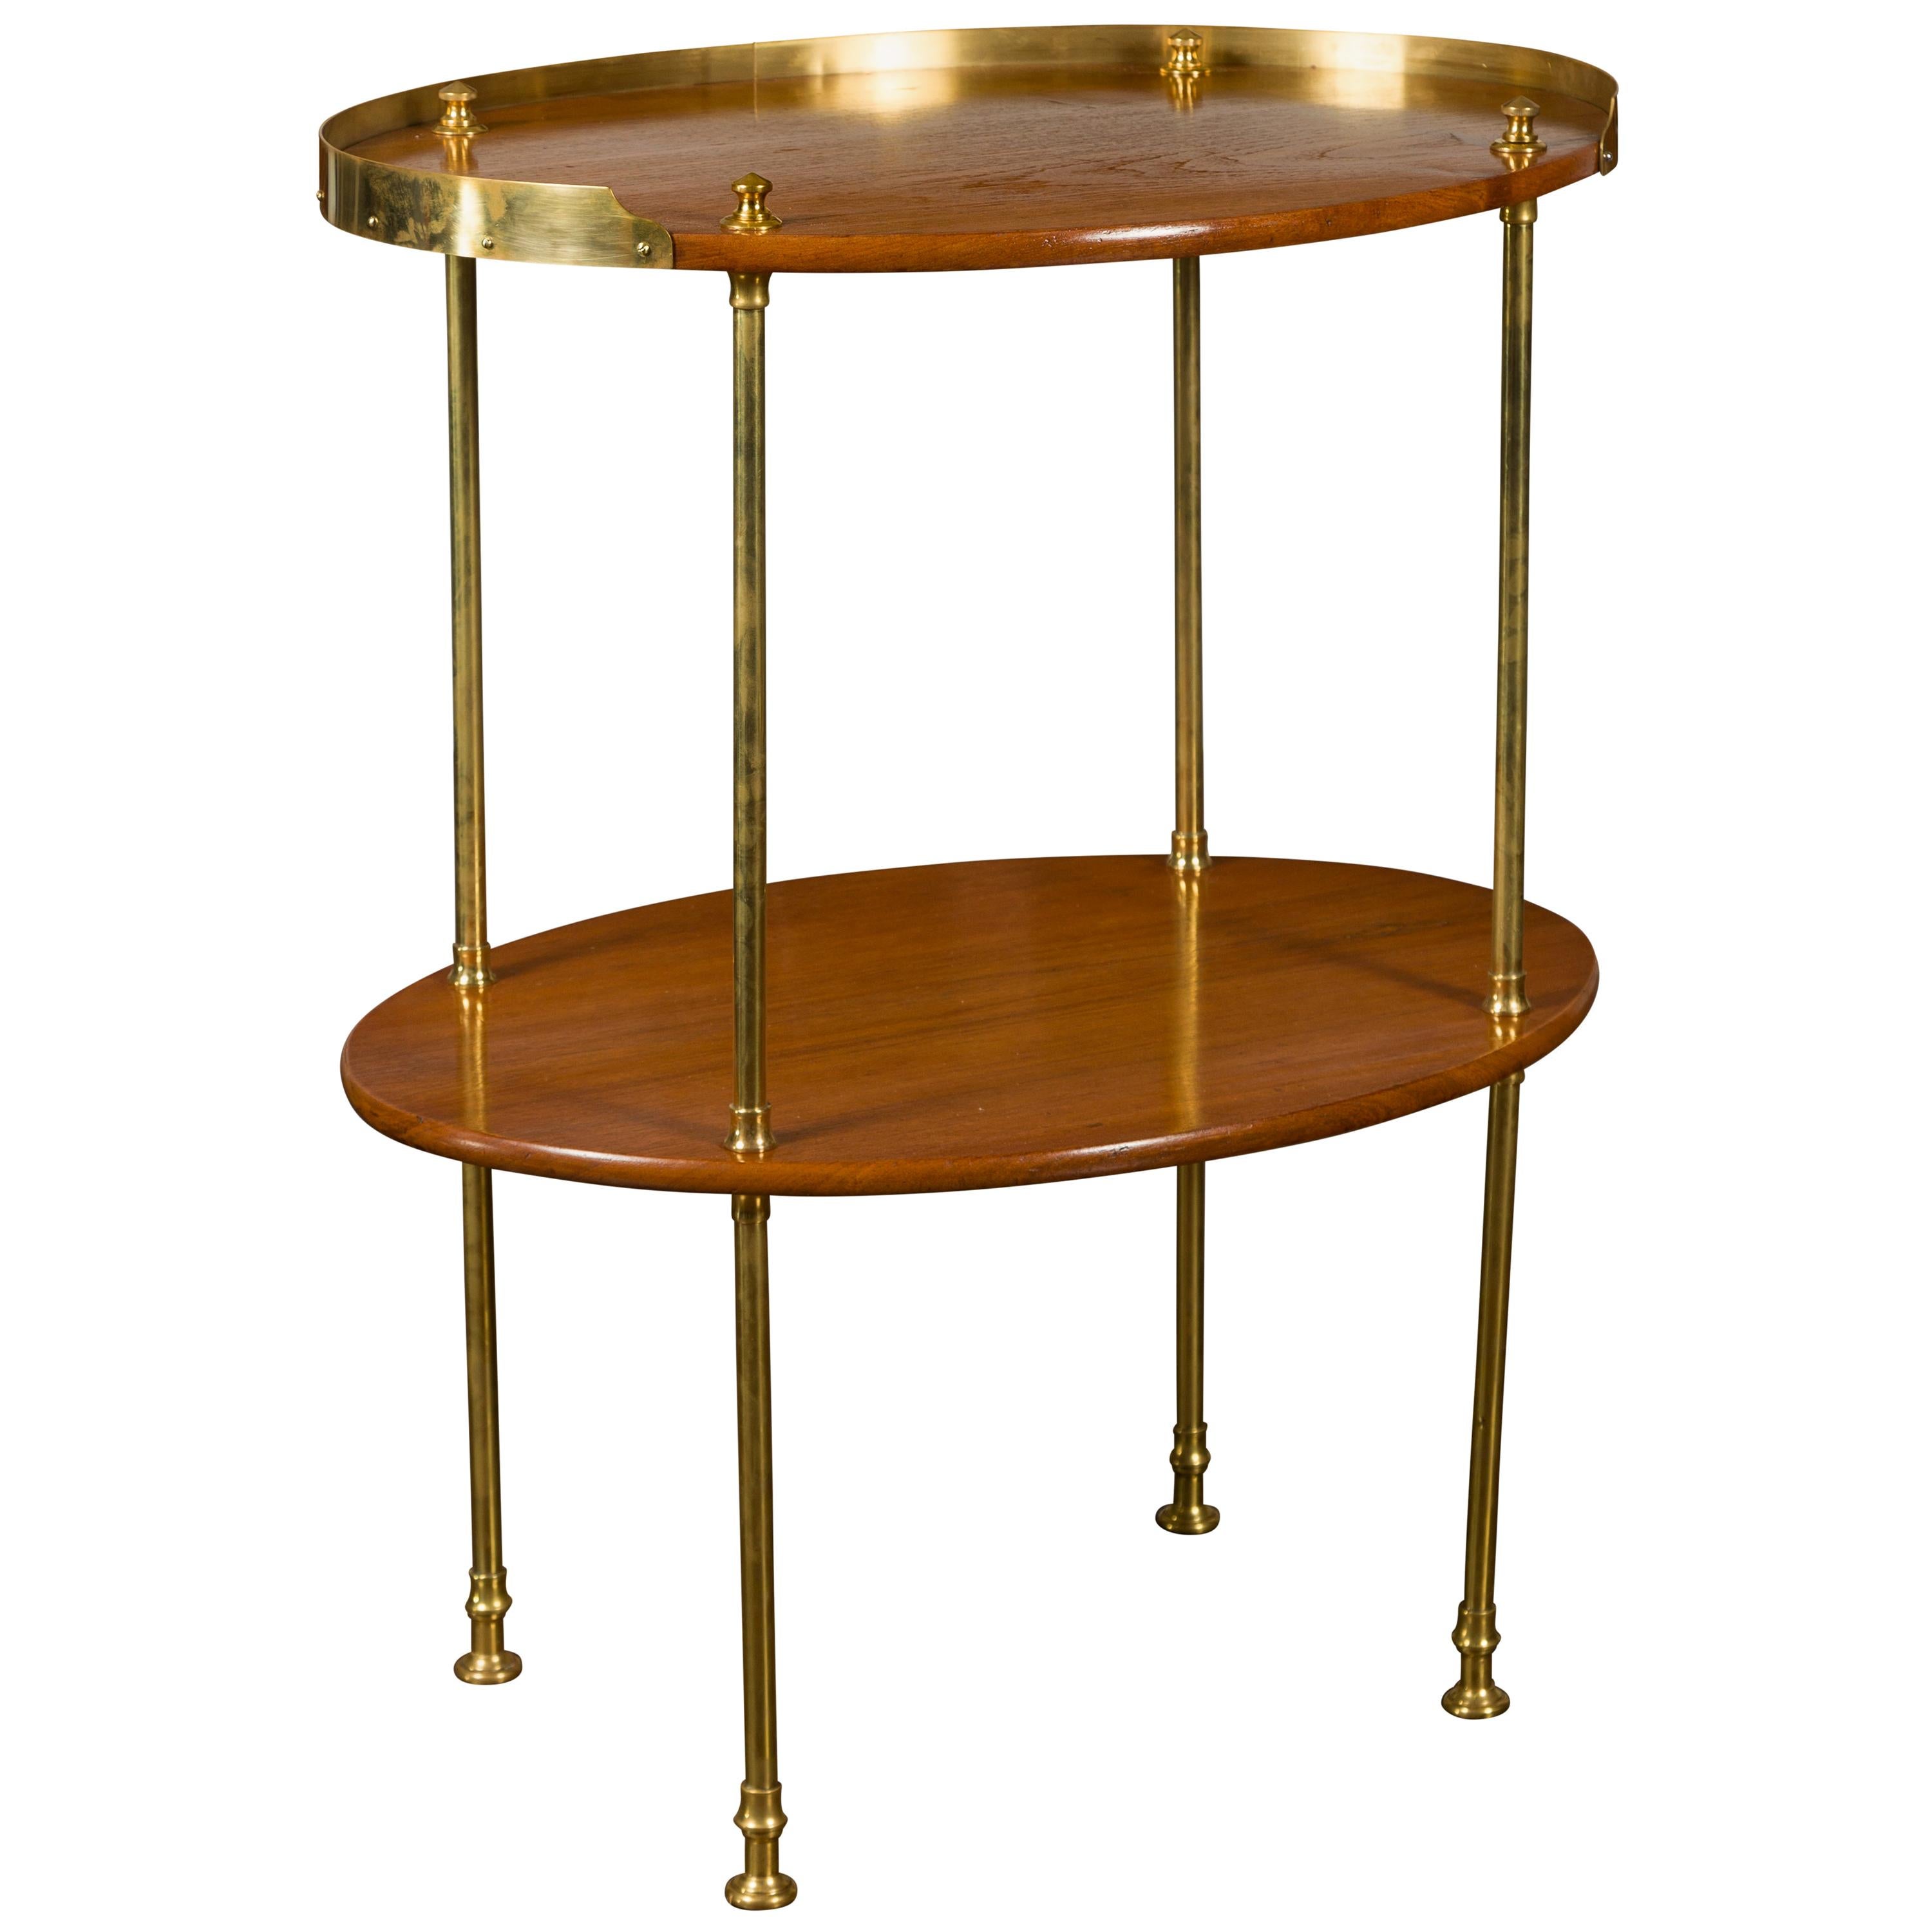 English Midcentury Mahogany Oval Two-Tiered Table with Brass Accents For Sale